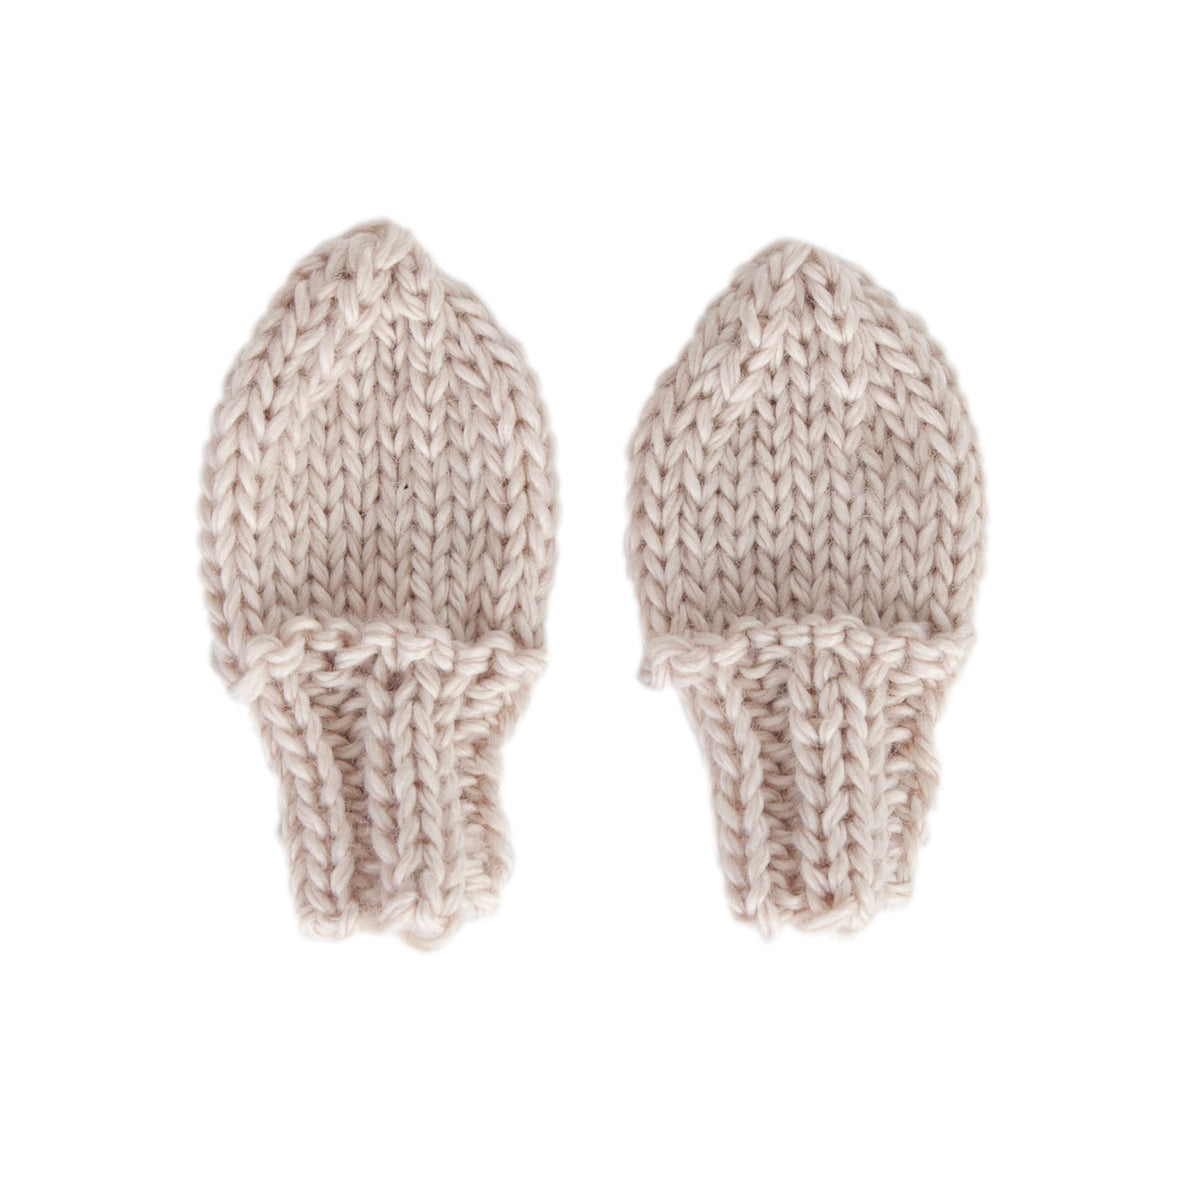 acorn kids cottontail baby mittens - oatmeal